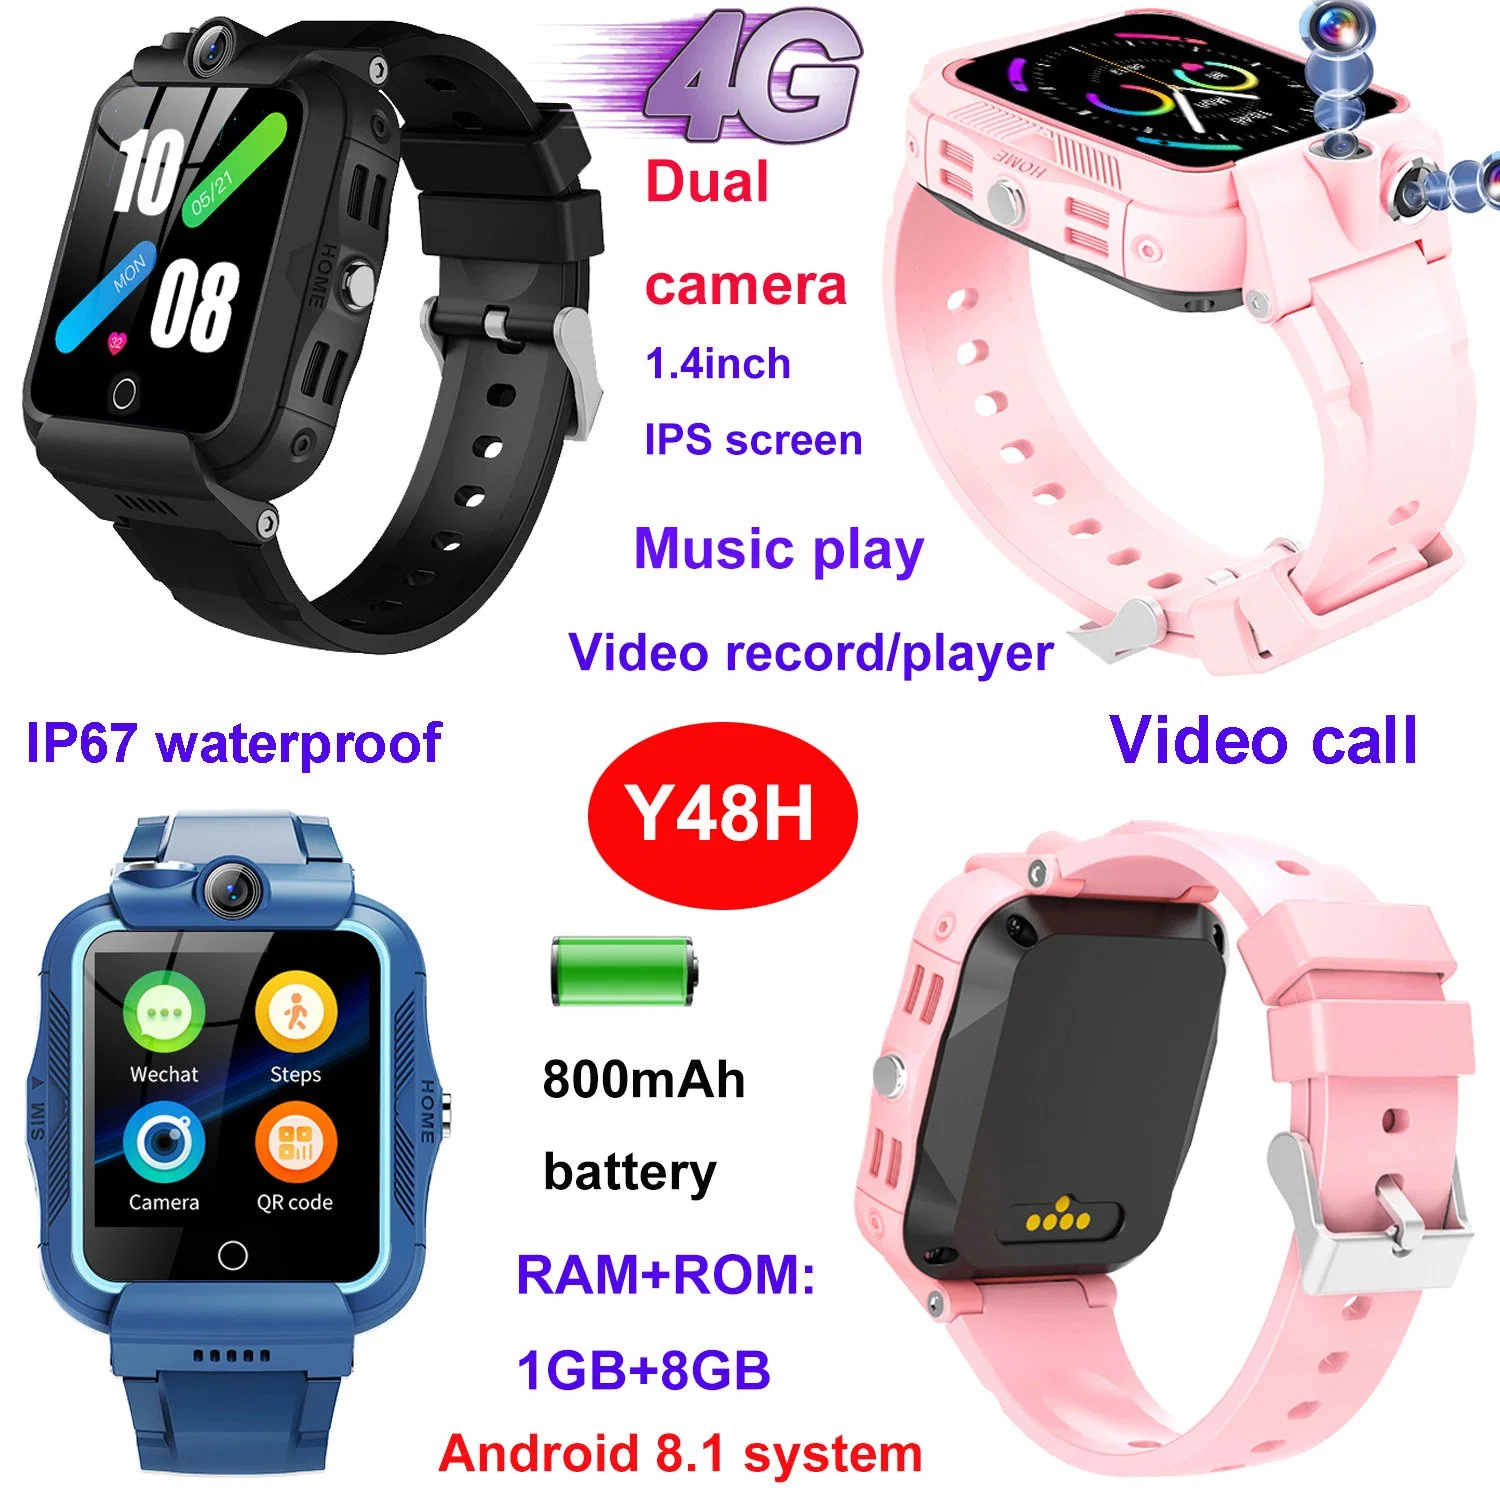 China manufacturer Accuracy 4G dual camera video call Child Kids safety smart Watch Tracker GPS with wifi connectivity classroom mode Y48H